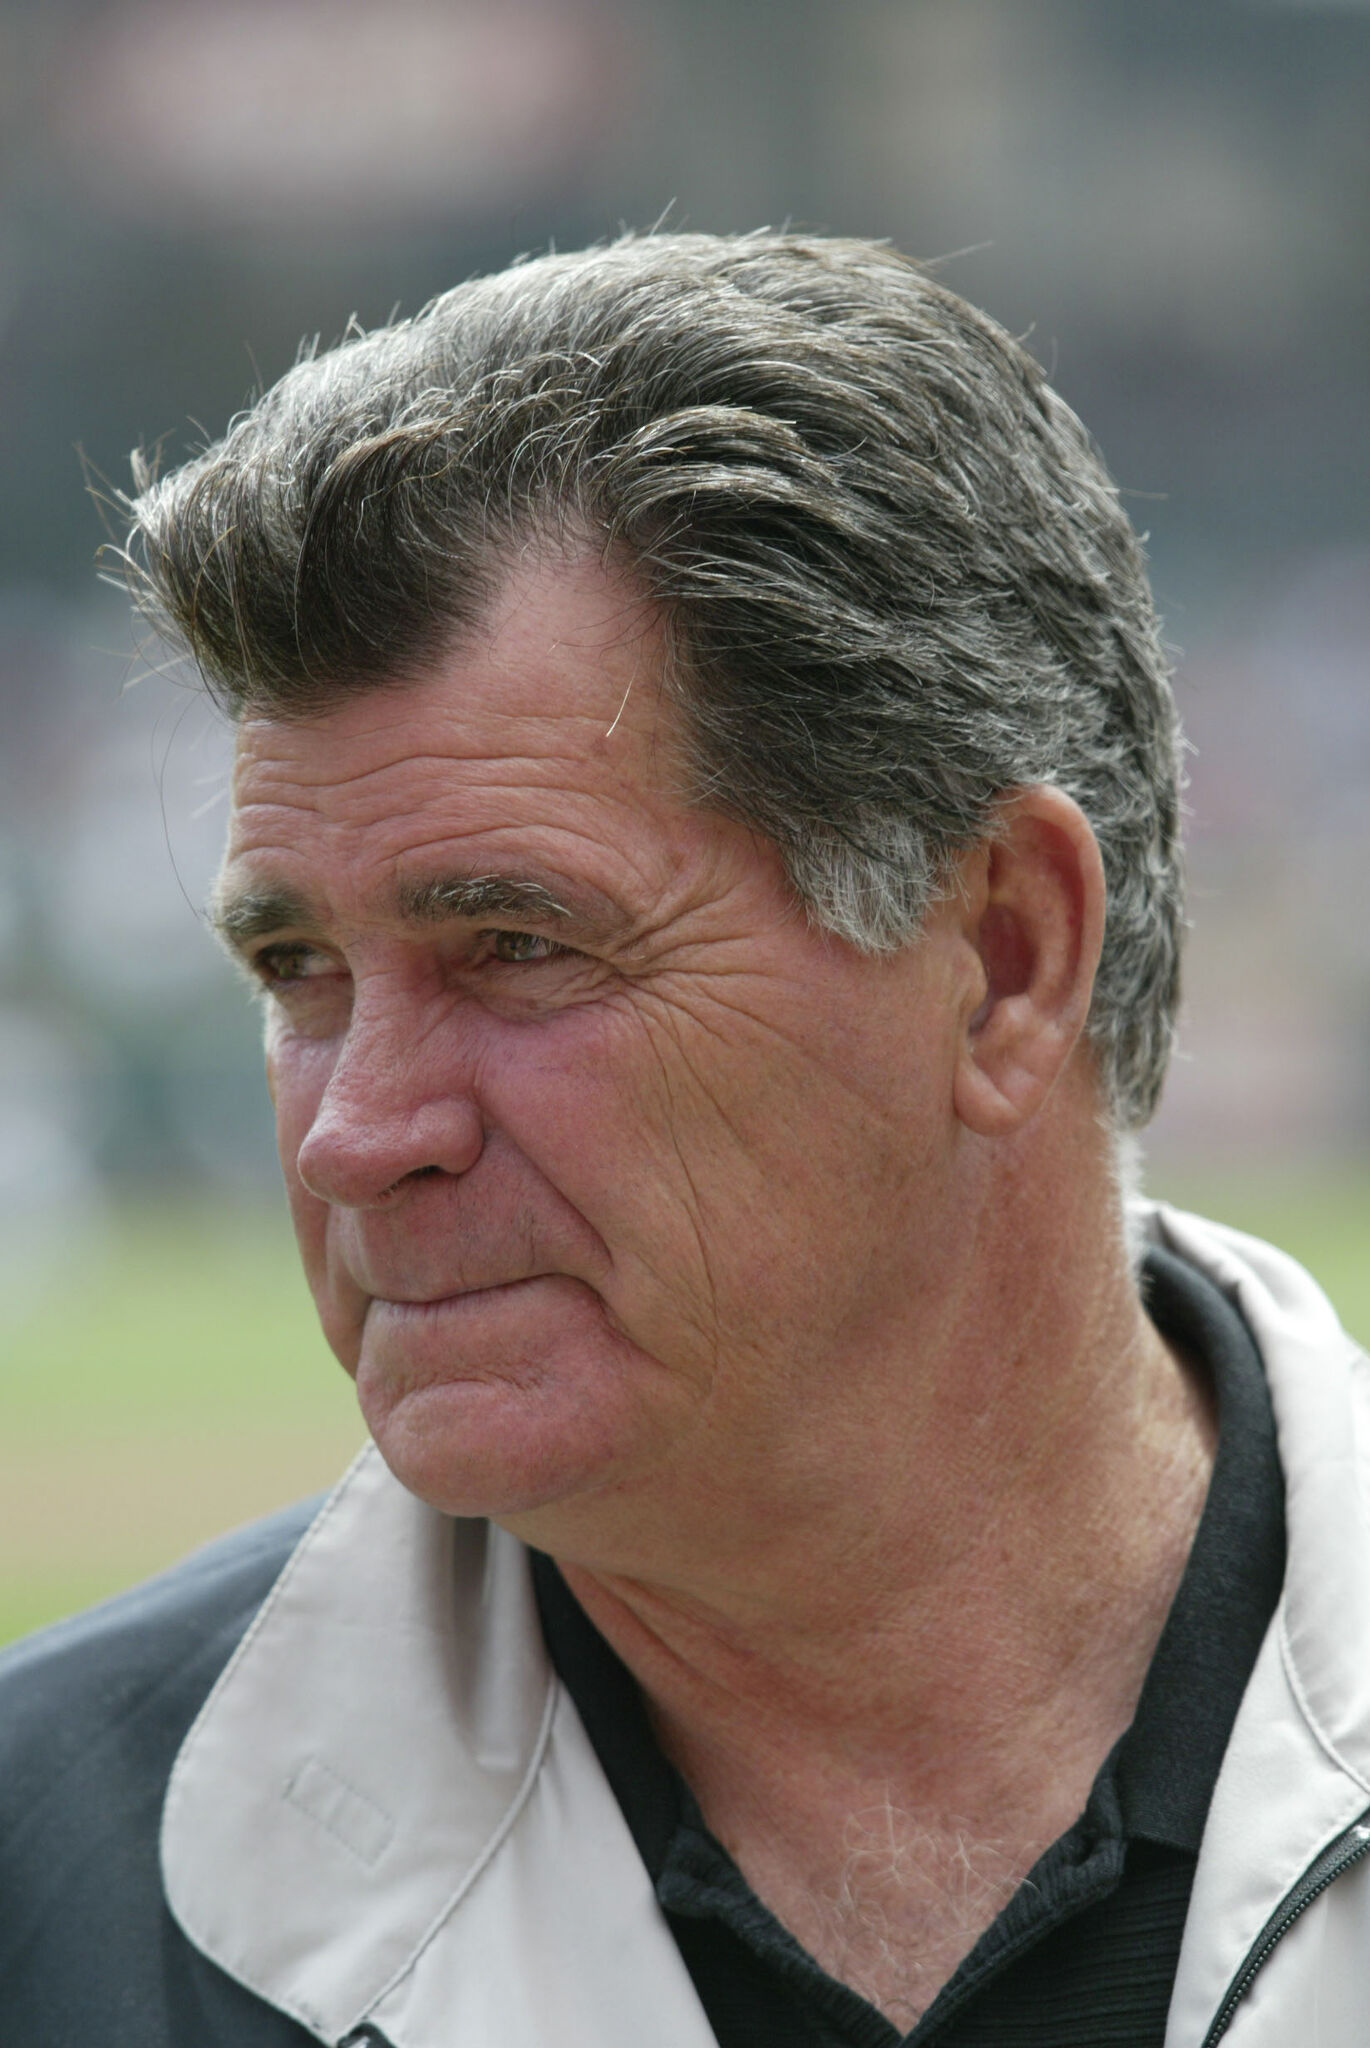 Cardinals Broadcaster, World Series Champ Mike Shannon Dies